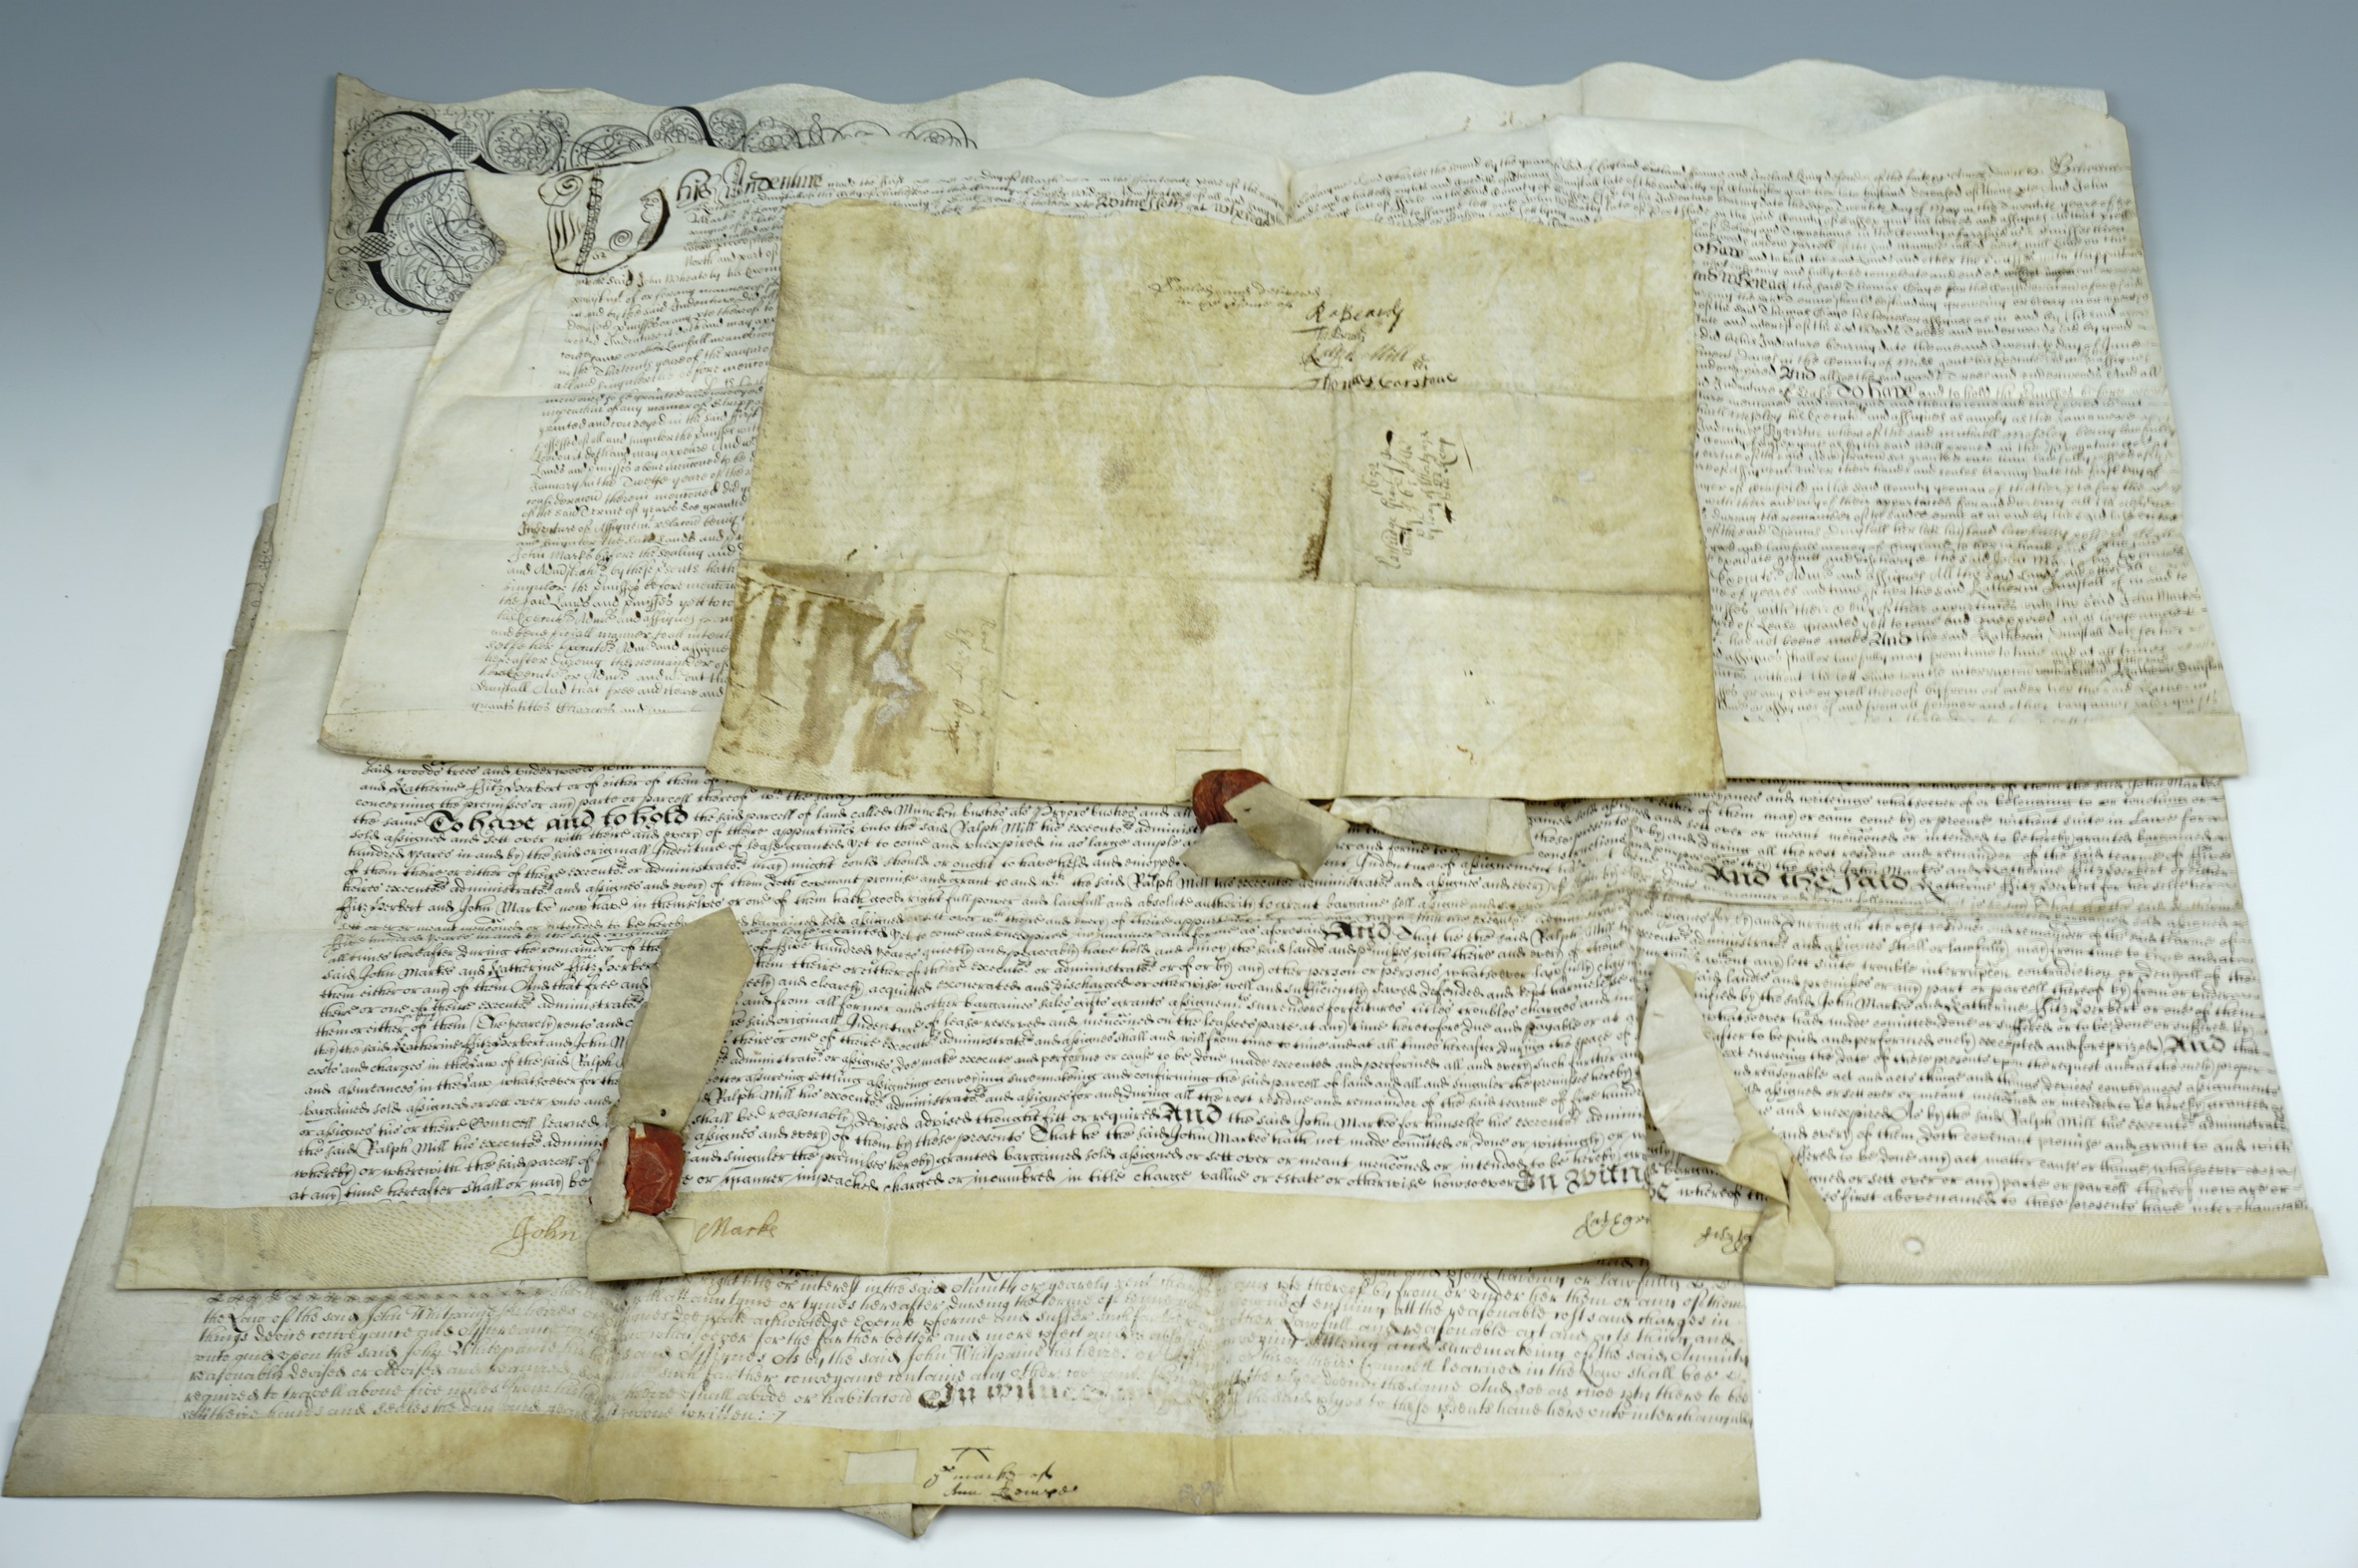 Five 17th century vellum indentures, two with vestiges of wax seals. - Image 2 of 4